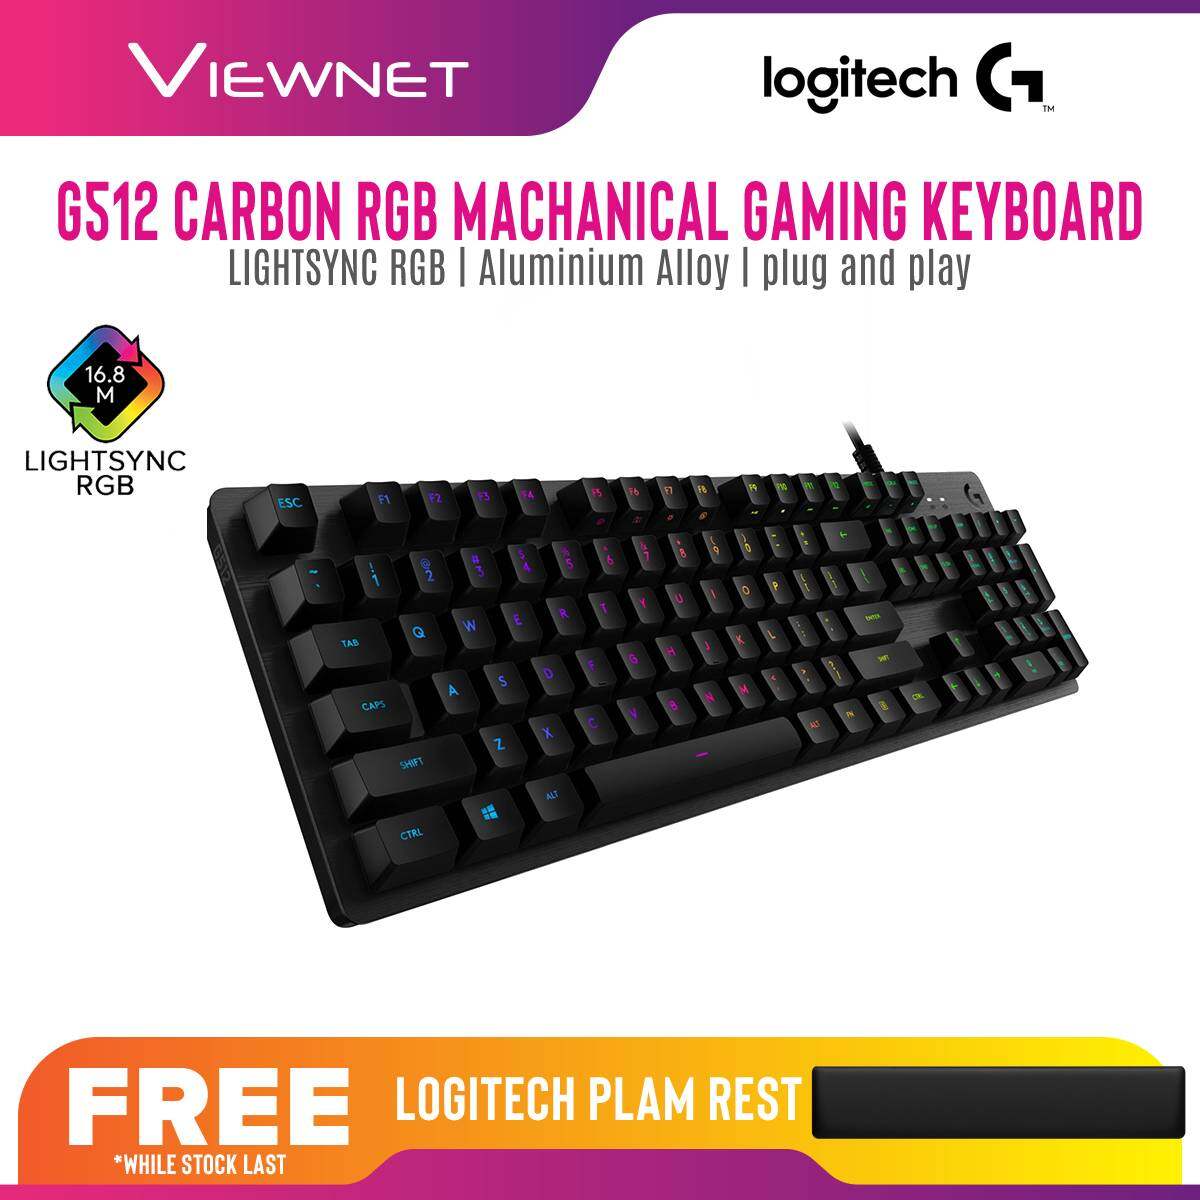 Logitech G512 Carbon RGB Mechanical Gaming Keyboard, Linear/Carbon Tactile/Carbon Clicky Keyboard (920-008762/920-008763/920-008949)